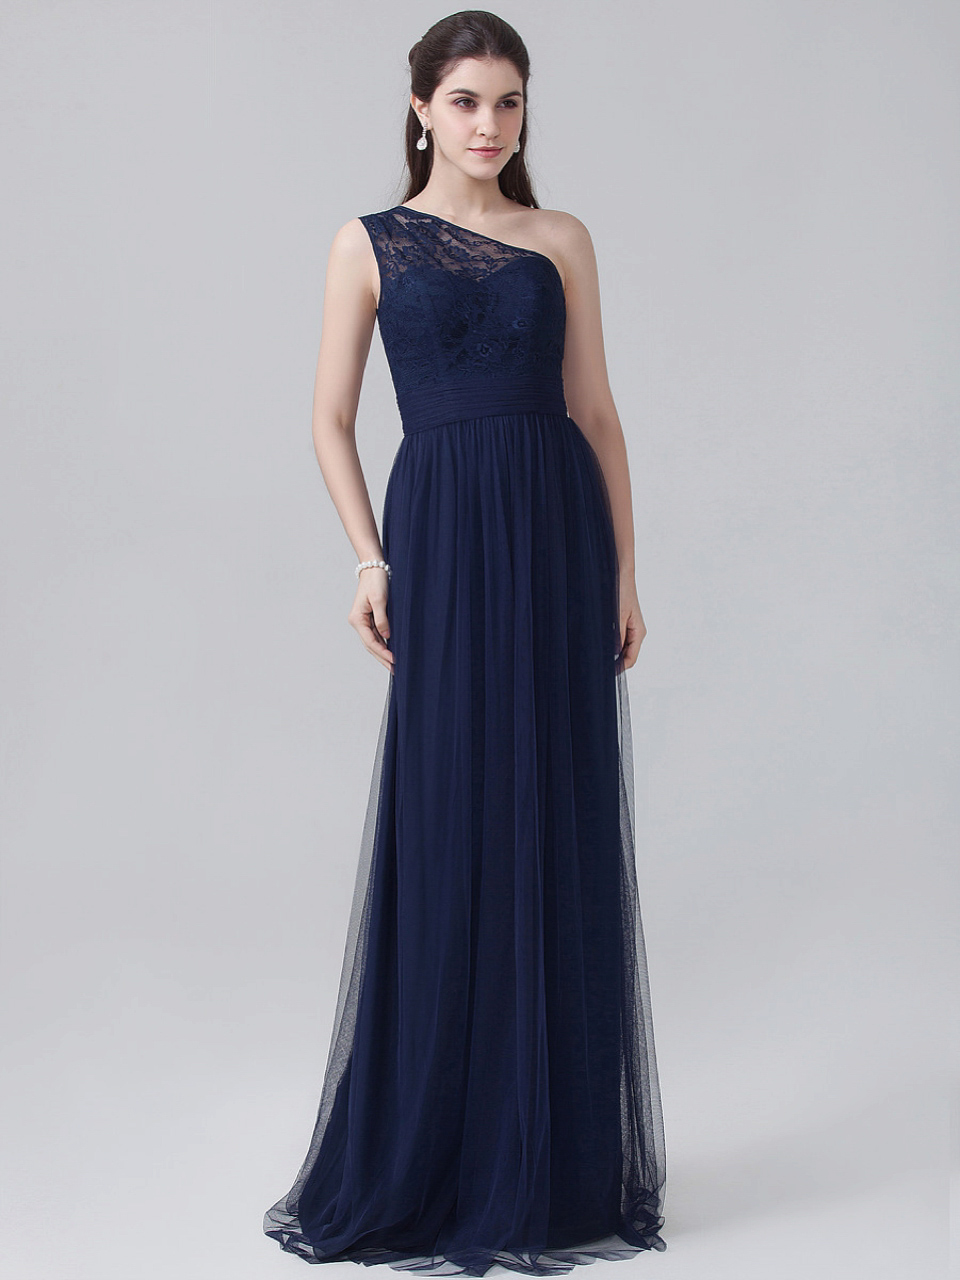 It's May Sale Time! Up To 30% Off Bridesmaid Dresses From For Her And ...